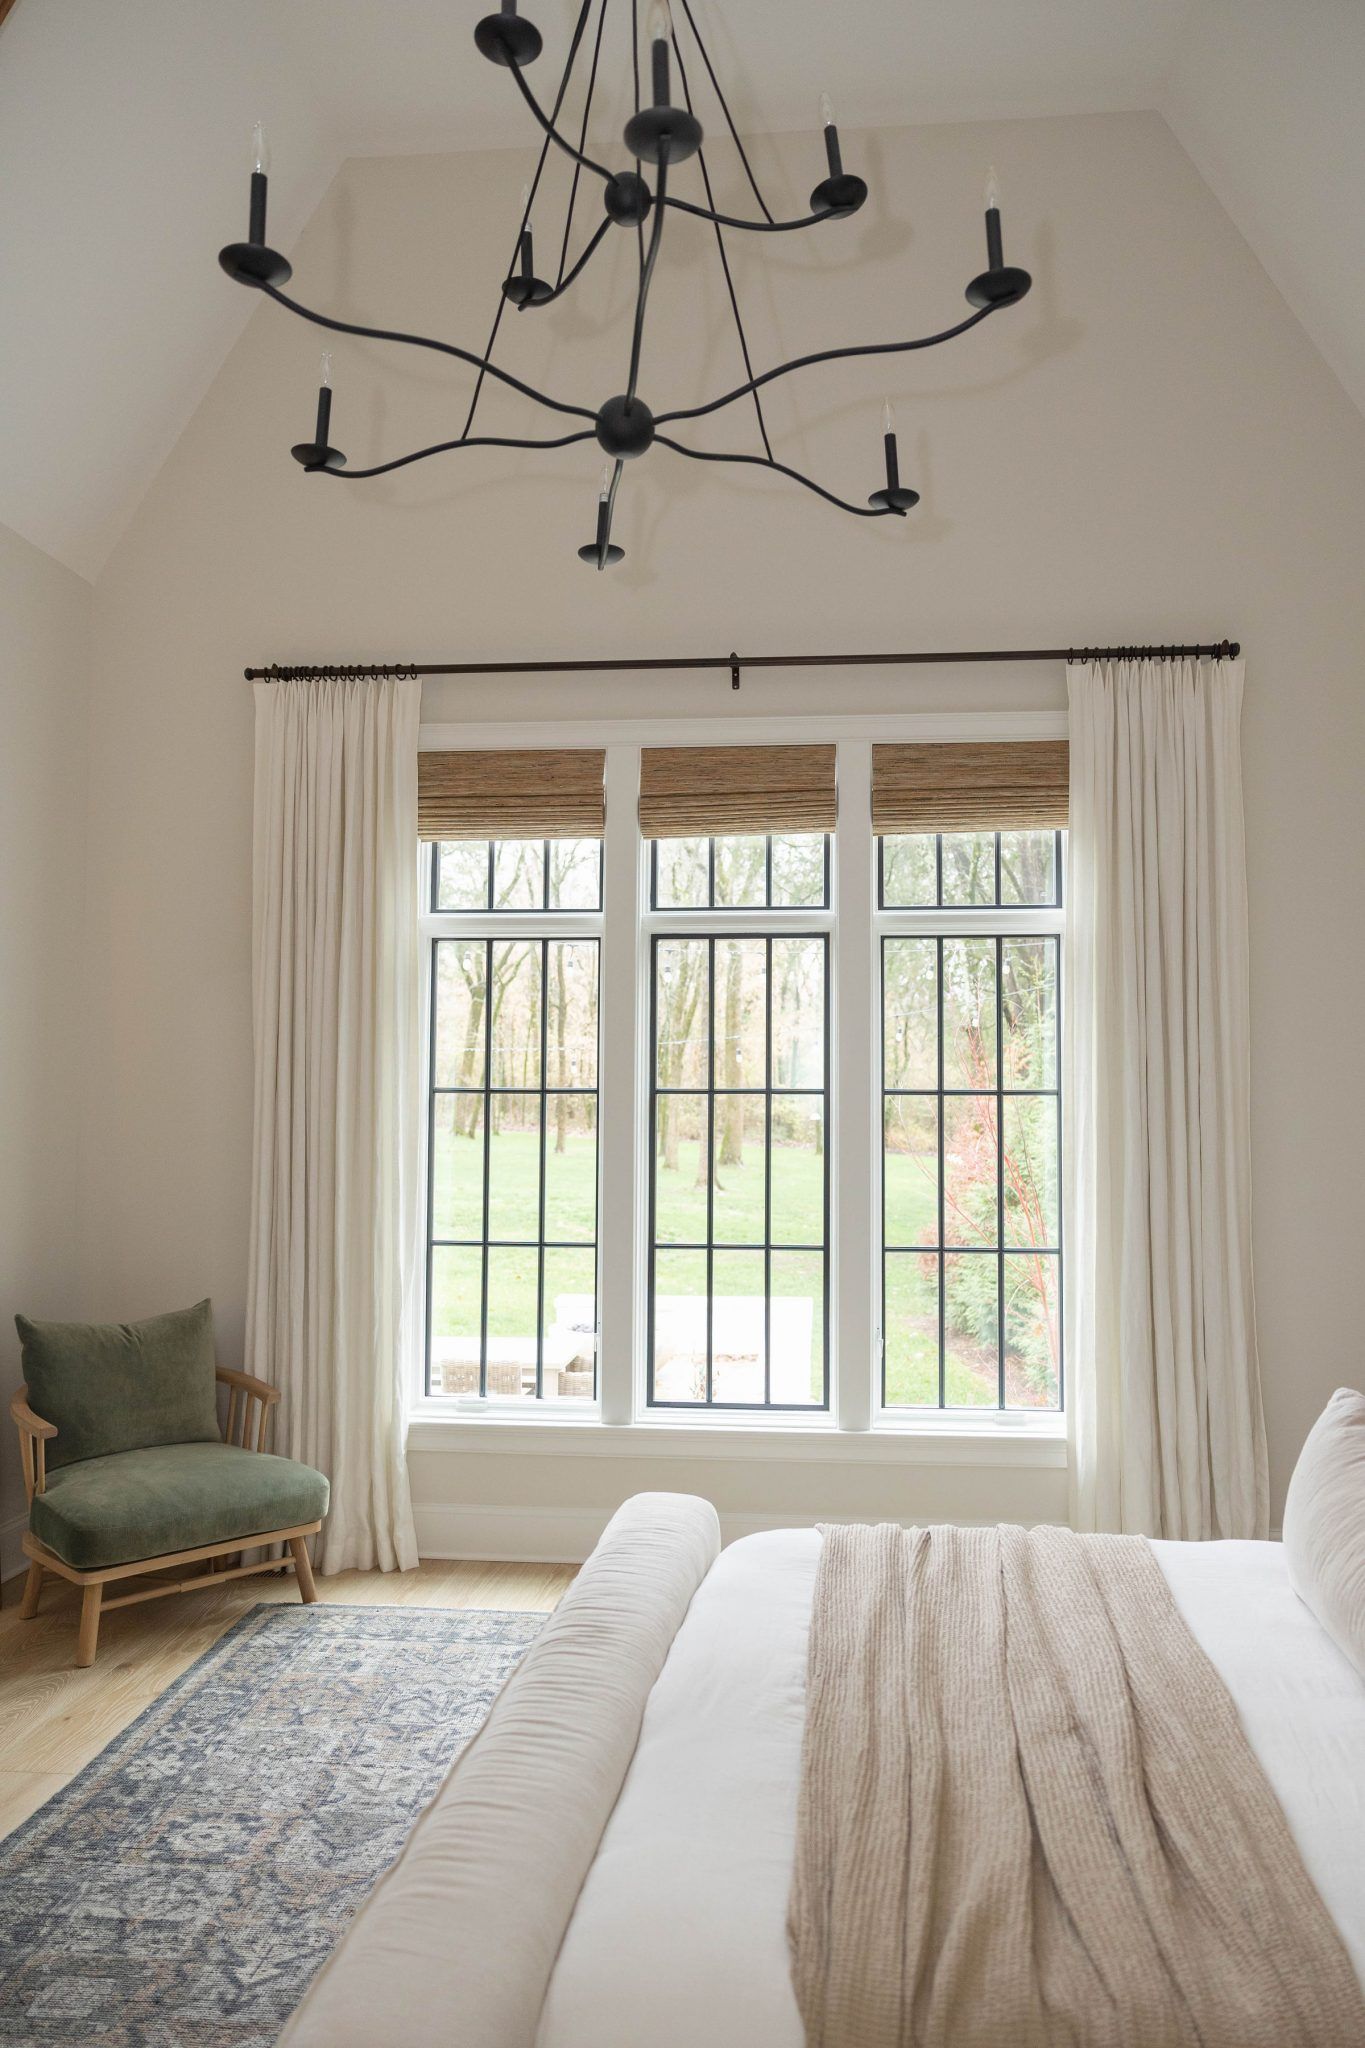 The Complete Guide to Choosing Bedroom
Window Treatments